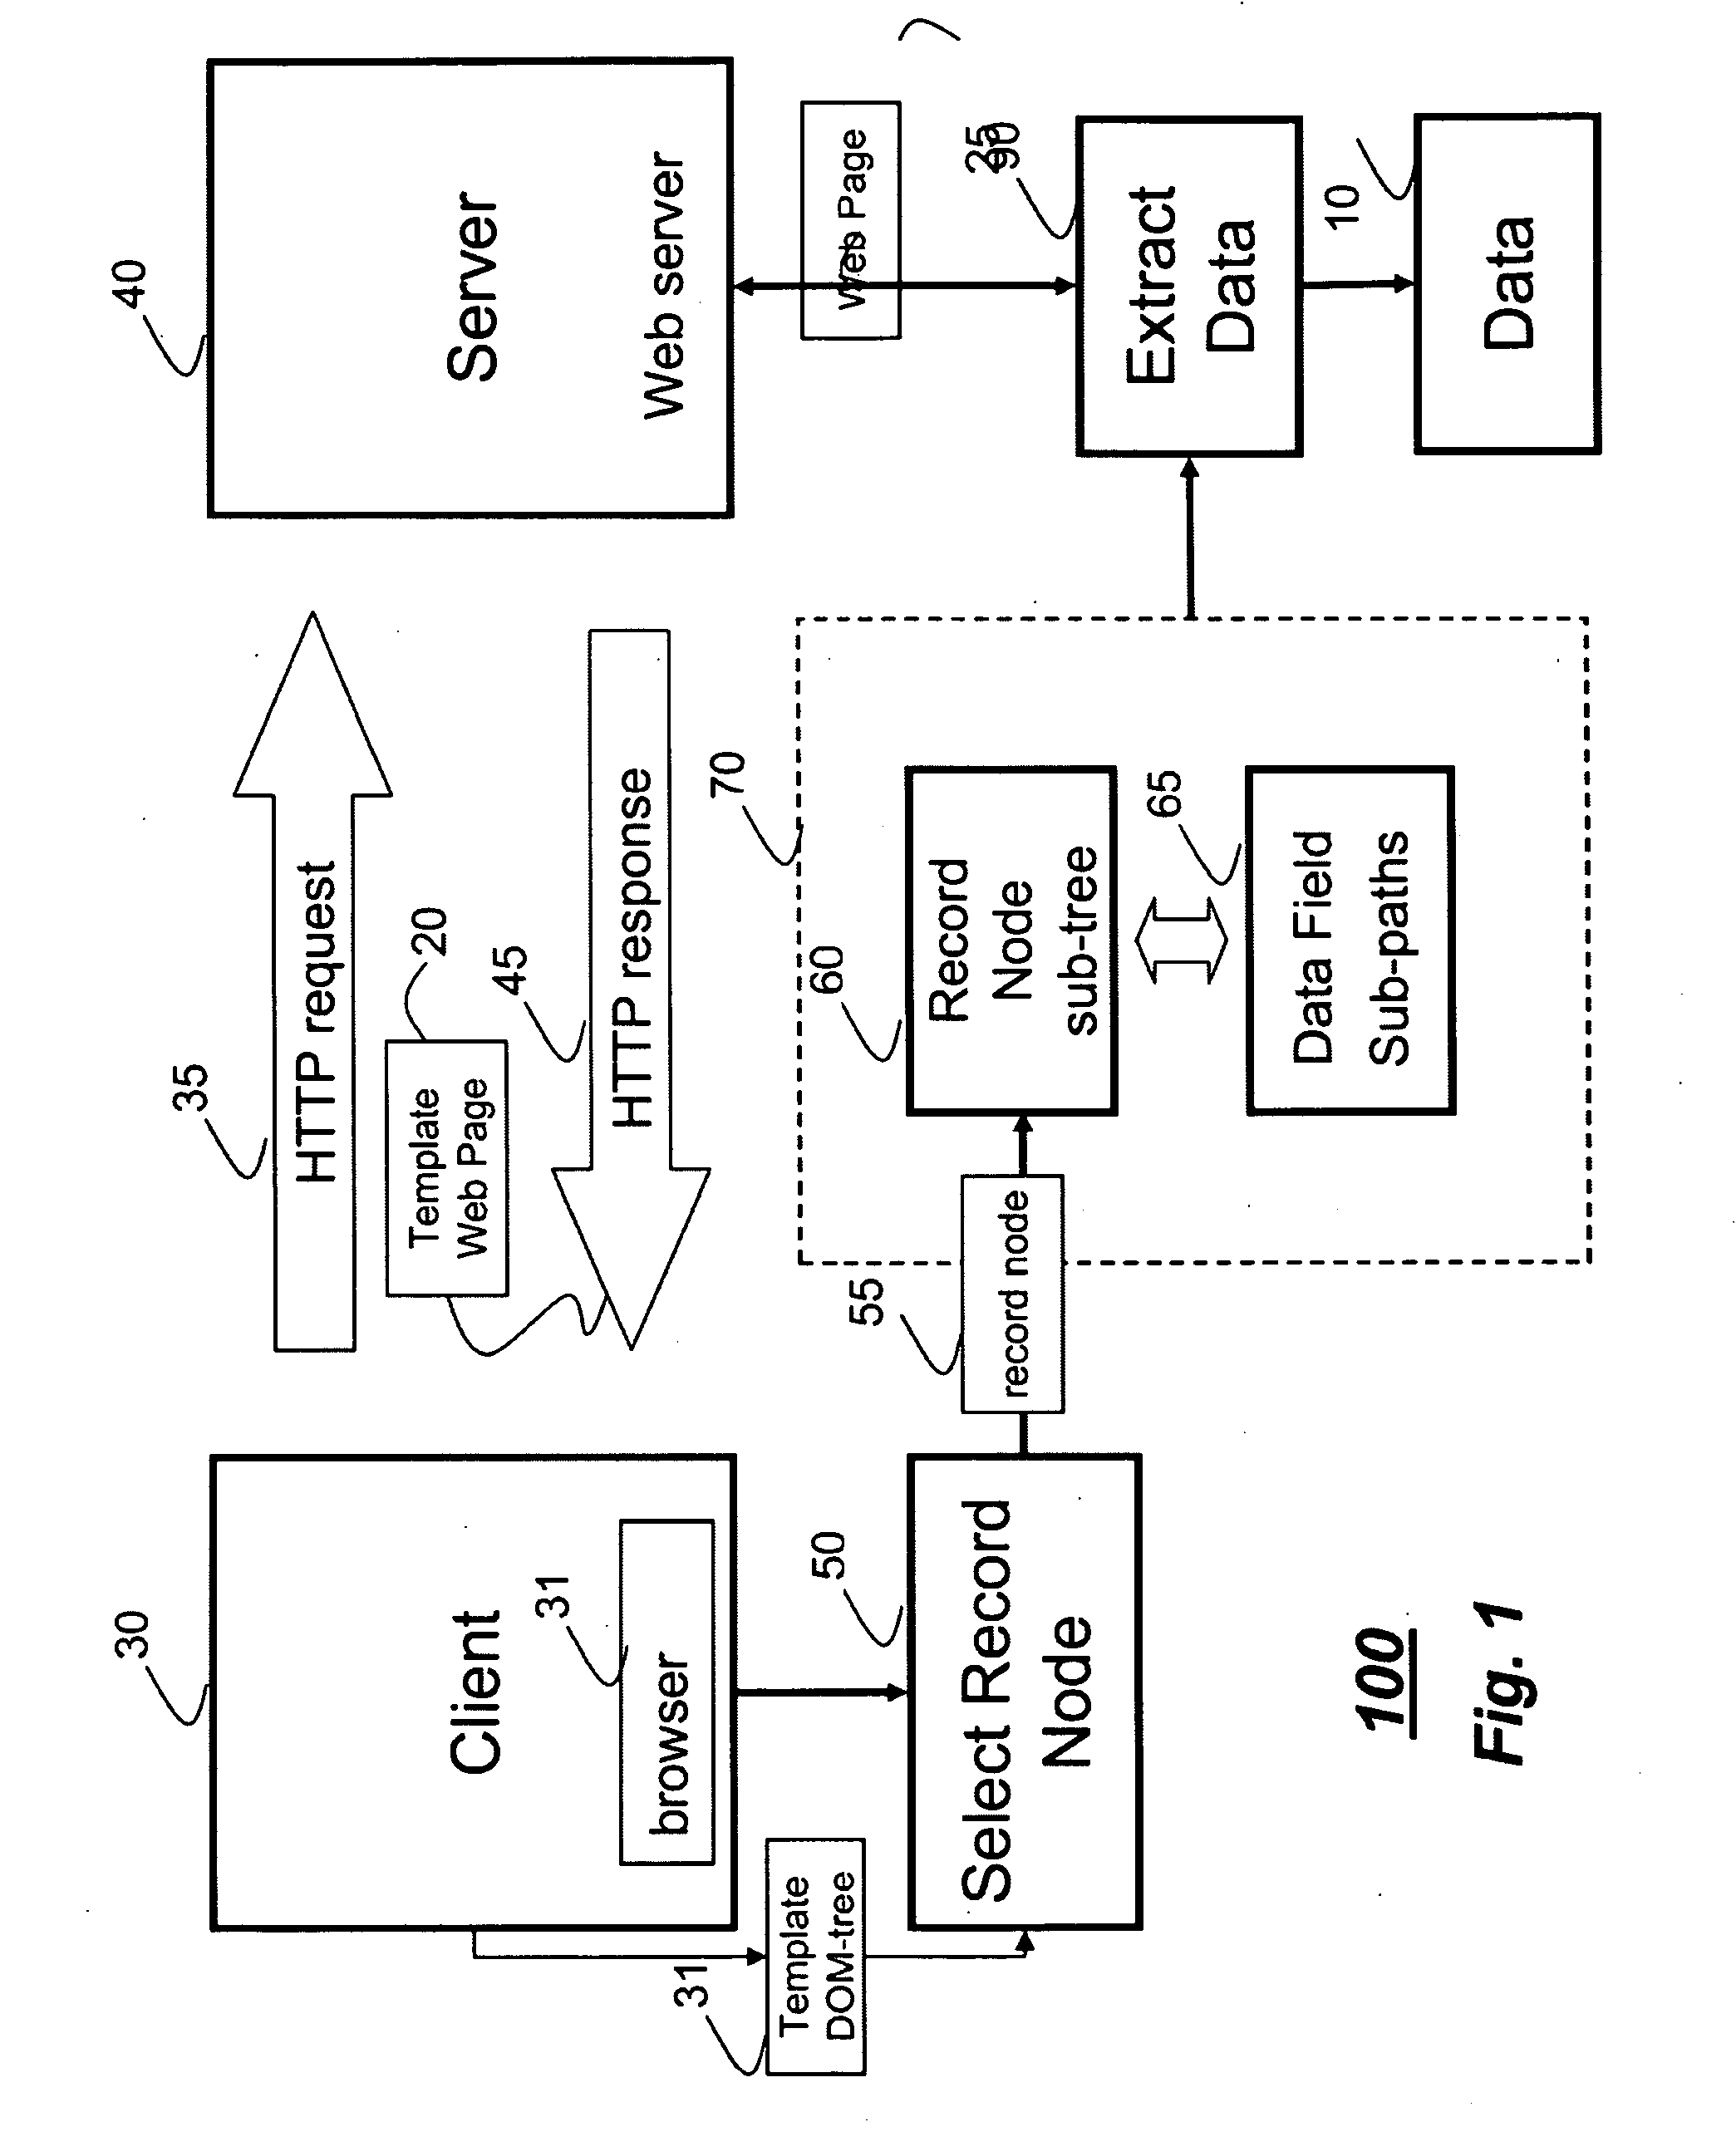 Method for Extracting Data from Web Pages